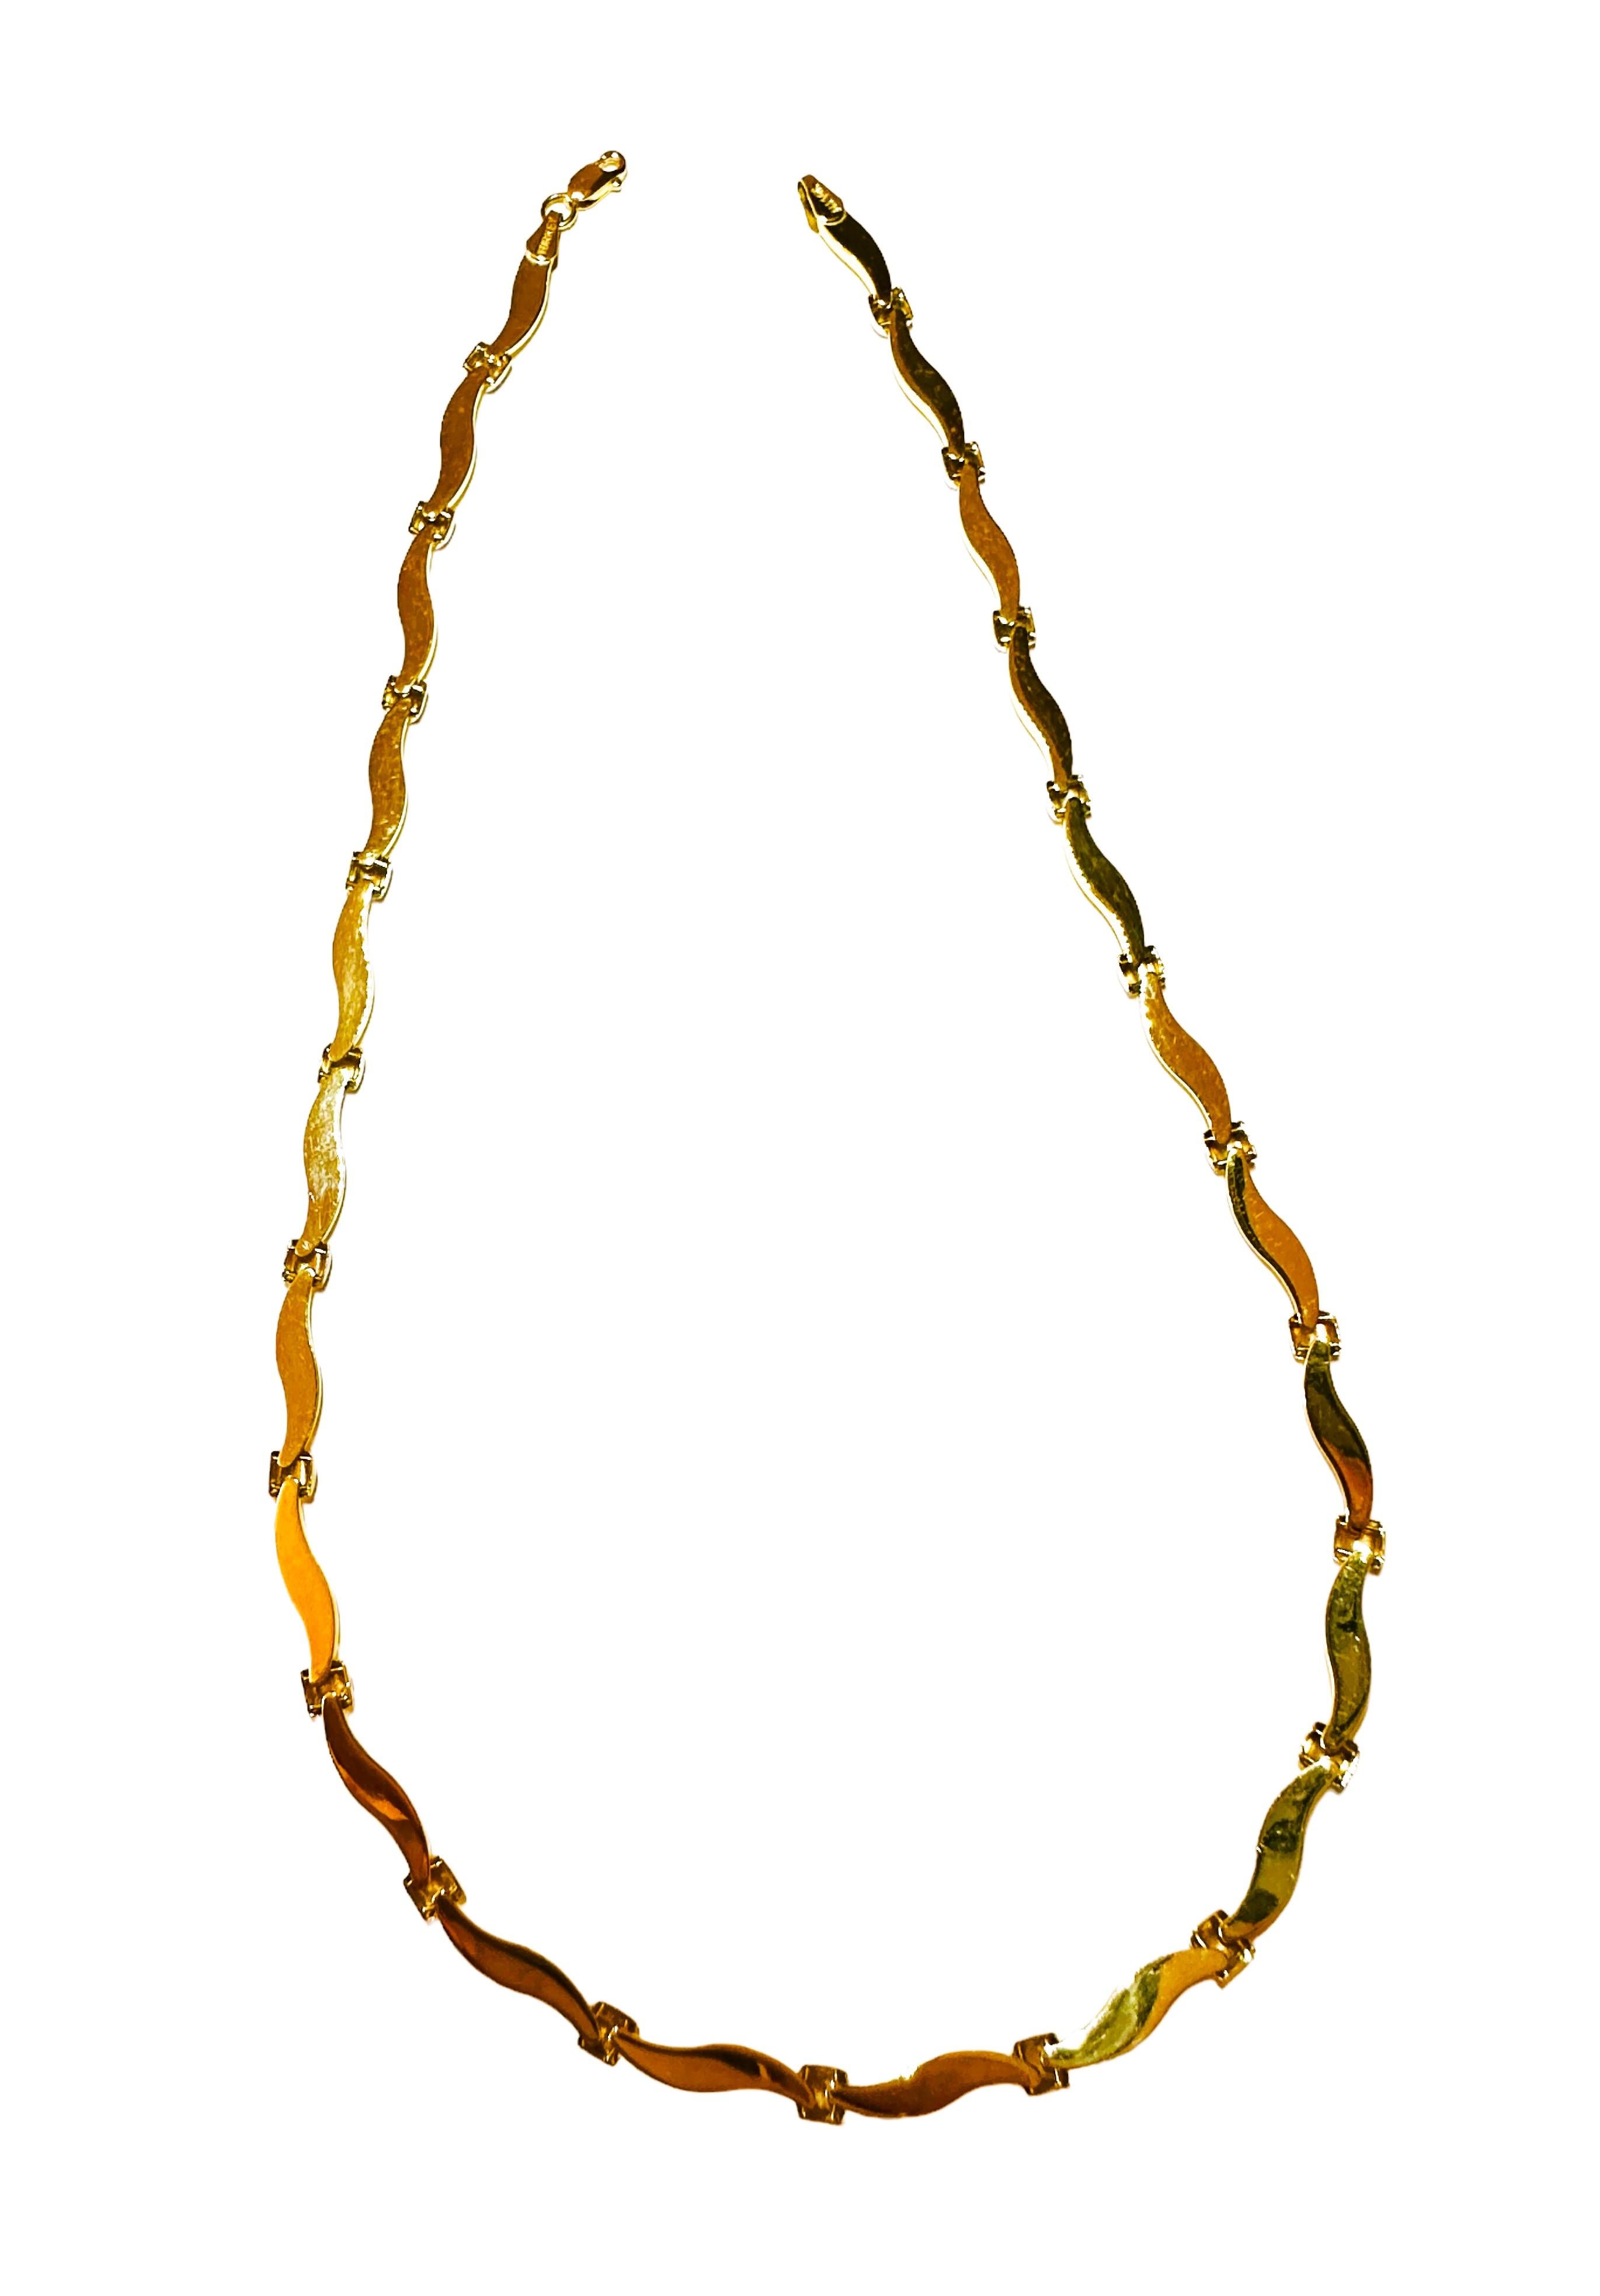 14k Yellow & White Gold Two-Tone Necklace 17.25 Inches 9.50 Grams For Sale 1